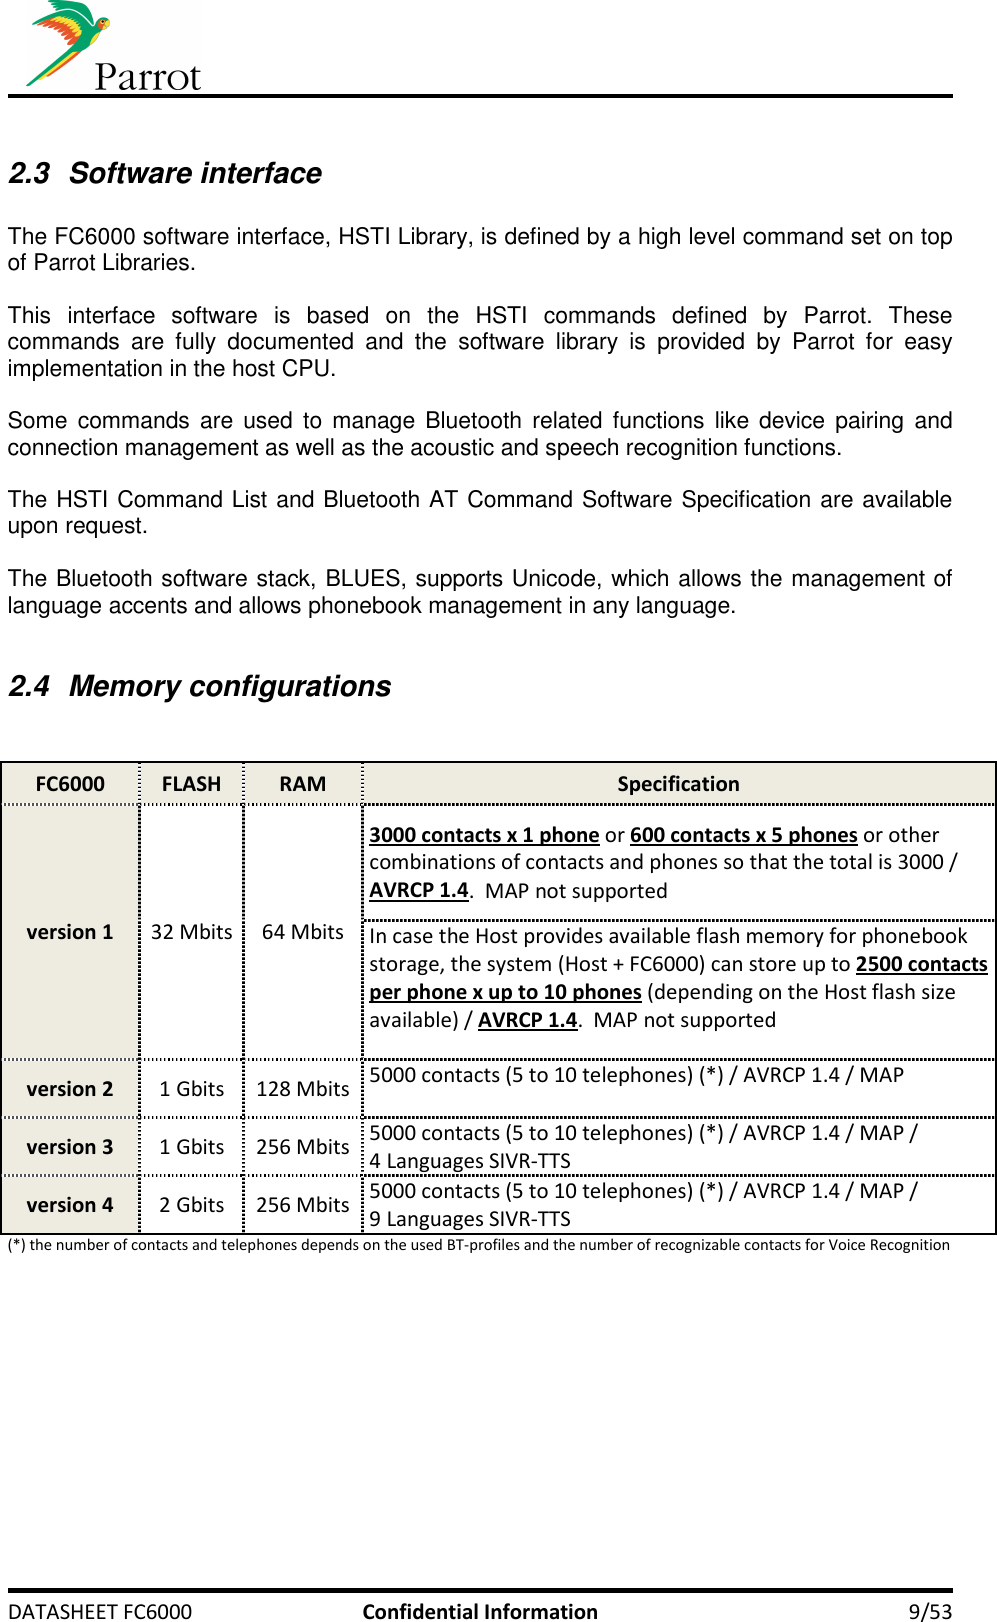     DATASHEET FC6000  Confidential Information  9/53  2.3  Software interface  The FC6000 software interface, HSTI Library, is defined by a high level command set on top of Parrot Libraries.  This  interface  software  is  based  on  the  HSTI  commands  defined  by  Parrot.  These commands  are  fully  documented  and  the  software  library  is  provided  by  Parrot  for  easy implementation in the host CPU.  Some  commands are  used  to  manage Bluetooth  related  functions like  device pairing  and connection management as well as the acoustic and speech recognition functions.  The HSTI Command List and Bluetooth AT Command Software Specification are available upon request.  The Bluetooth software stack, BLUES, supports Unicode, which allows the management of language accents and allows phonebook management in any language.  2.4  Memory configurations   FC6000  FLASH  RAM  Specification version 1  32 Mbits 64 Mbits 3000 contacts x 1 phone or 600 contacts x 5 phones or other combinations of contacts and phones so that the total is 3000 /  AVRCP 1.4.  MAP not supported In case the Host provides available flash memory for phonebook storage, the system (Host + FC6000) can store up to 2500 contacts per phone x up to 10 phones (depending on the Host flash size available) / AVRCP 1.4.  MAP not supported version 2  1 Gbits  128 Mbits 5000 contacts (5 to 10 telephones) (*) / AVRCP 1.4 / MAP  version 3  1 Gbits  256 Mbits 5000 contacts (5 to 10 telephones) (*) / AVRCP 1.4 / MAP /  4 Languages SIVR-TTS version 4  2 Gbits  256 Mbits 5000 contacts (5 to 10 telephones) (*) / AVRCP 1.4 / MAP /  9 Languages SIVR-TTS (*) the number of contacts and telephones depends on the used BT-profiles and the number of recognizable contacts for Voice Recognition   